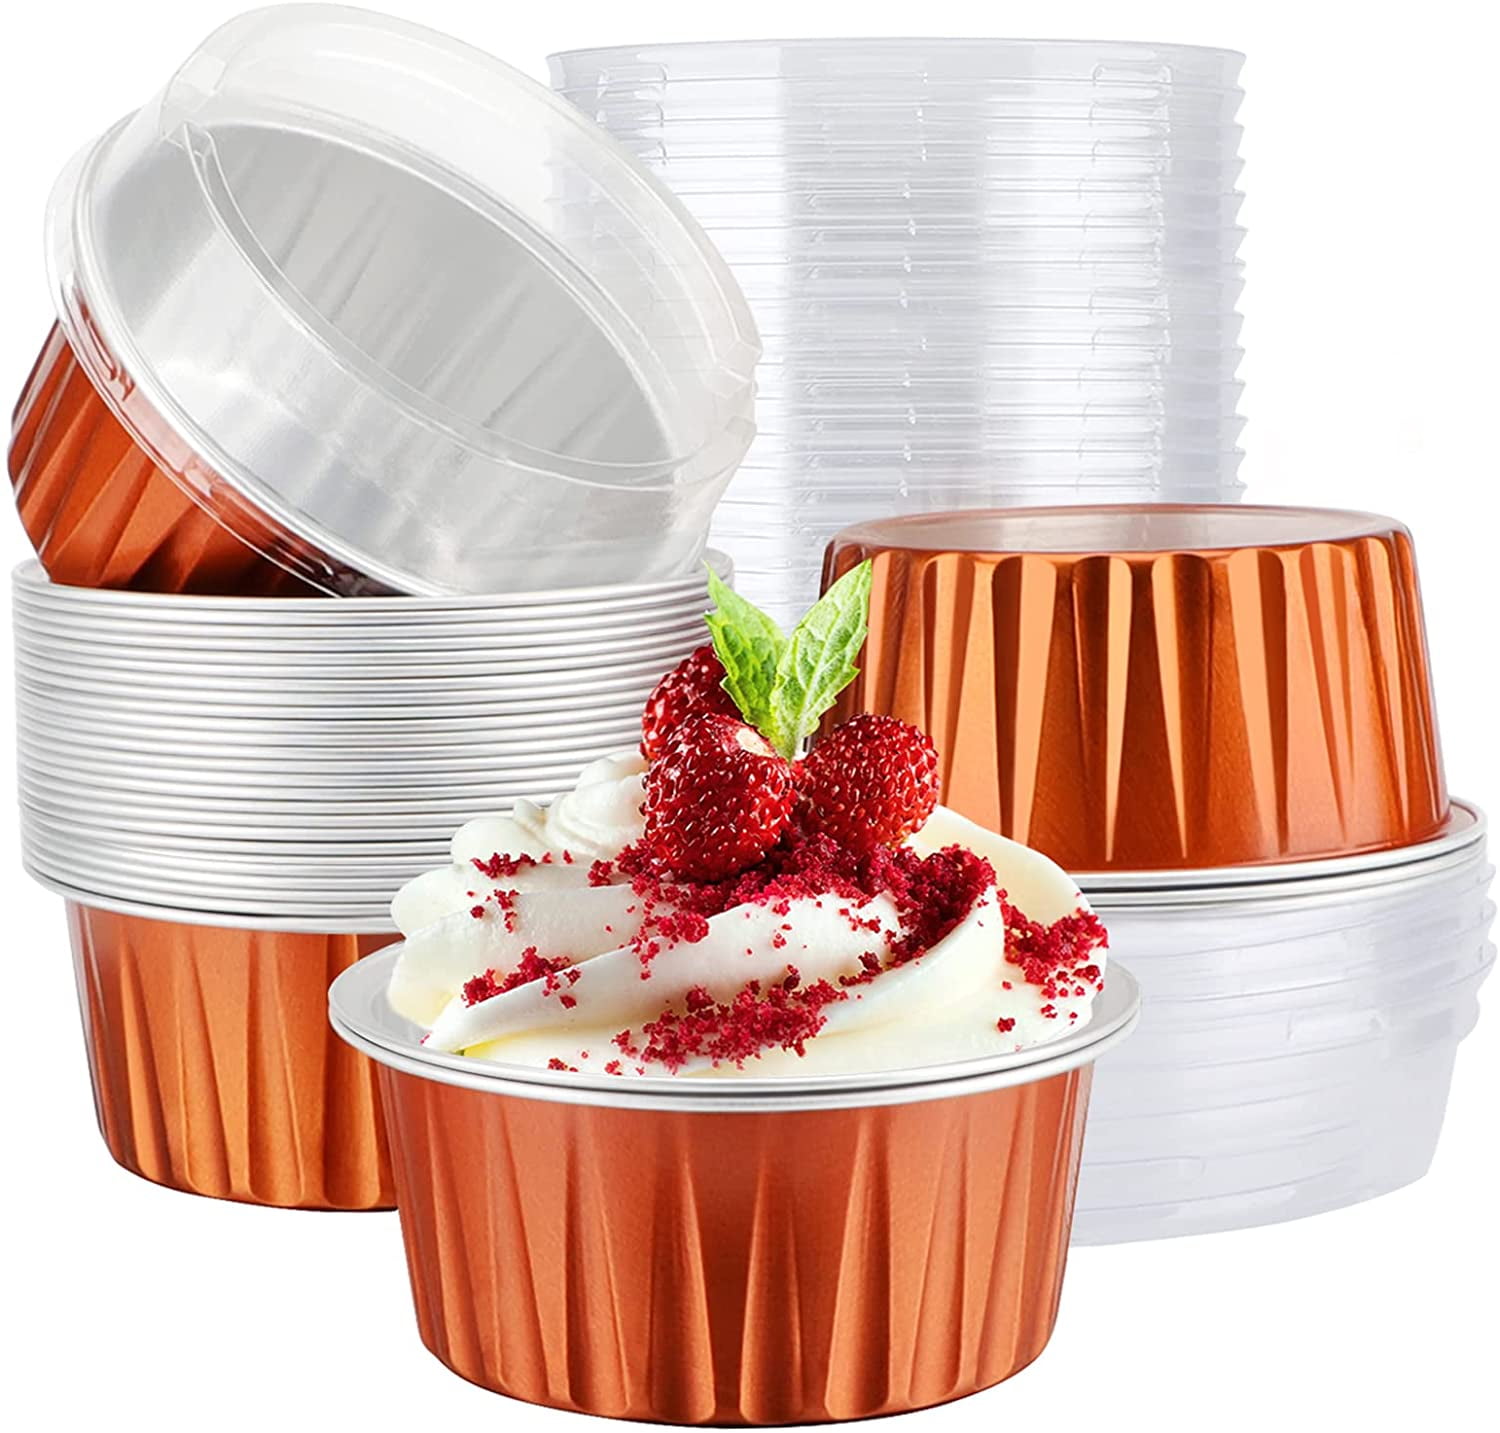 Disposable Colored Foil Tart Shell or Cupcake liner #K106